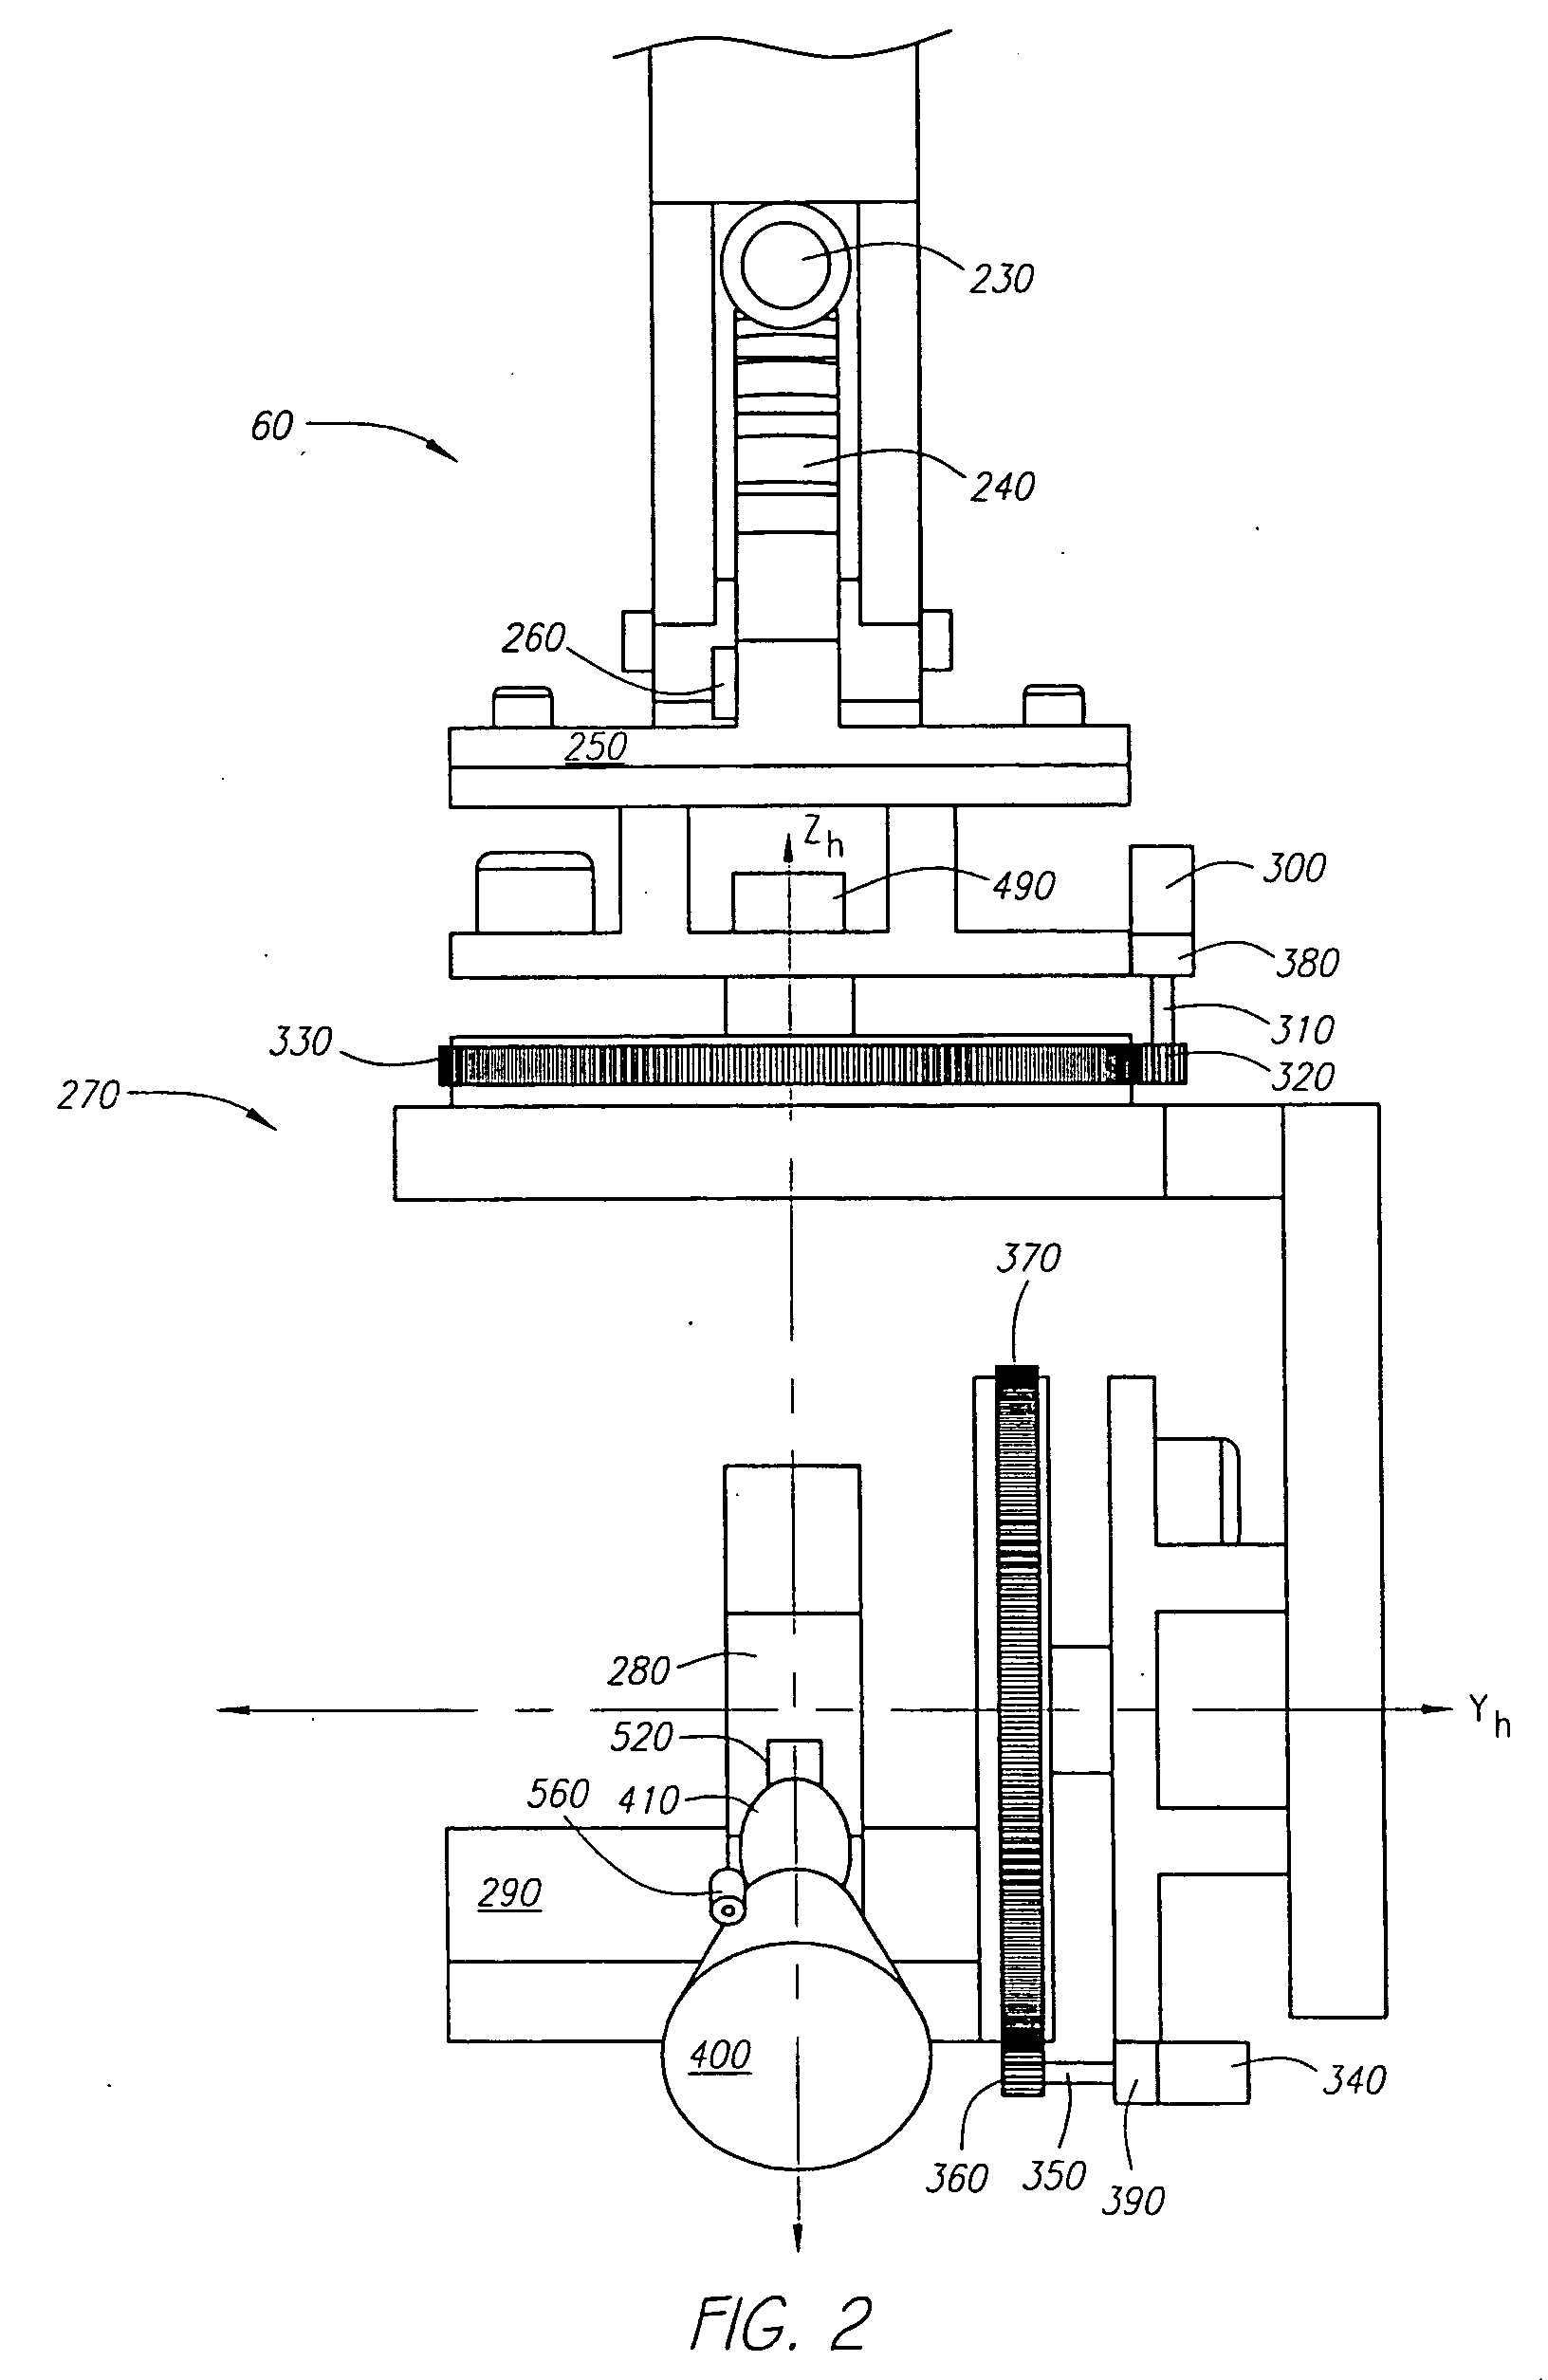 Automatic pan and tilt compensation system for a camera support structure